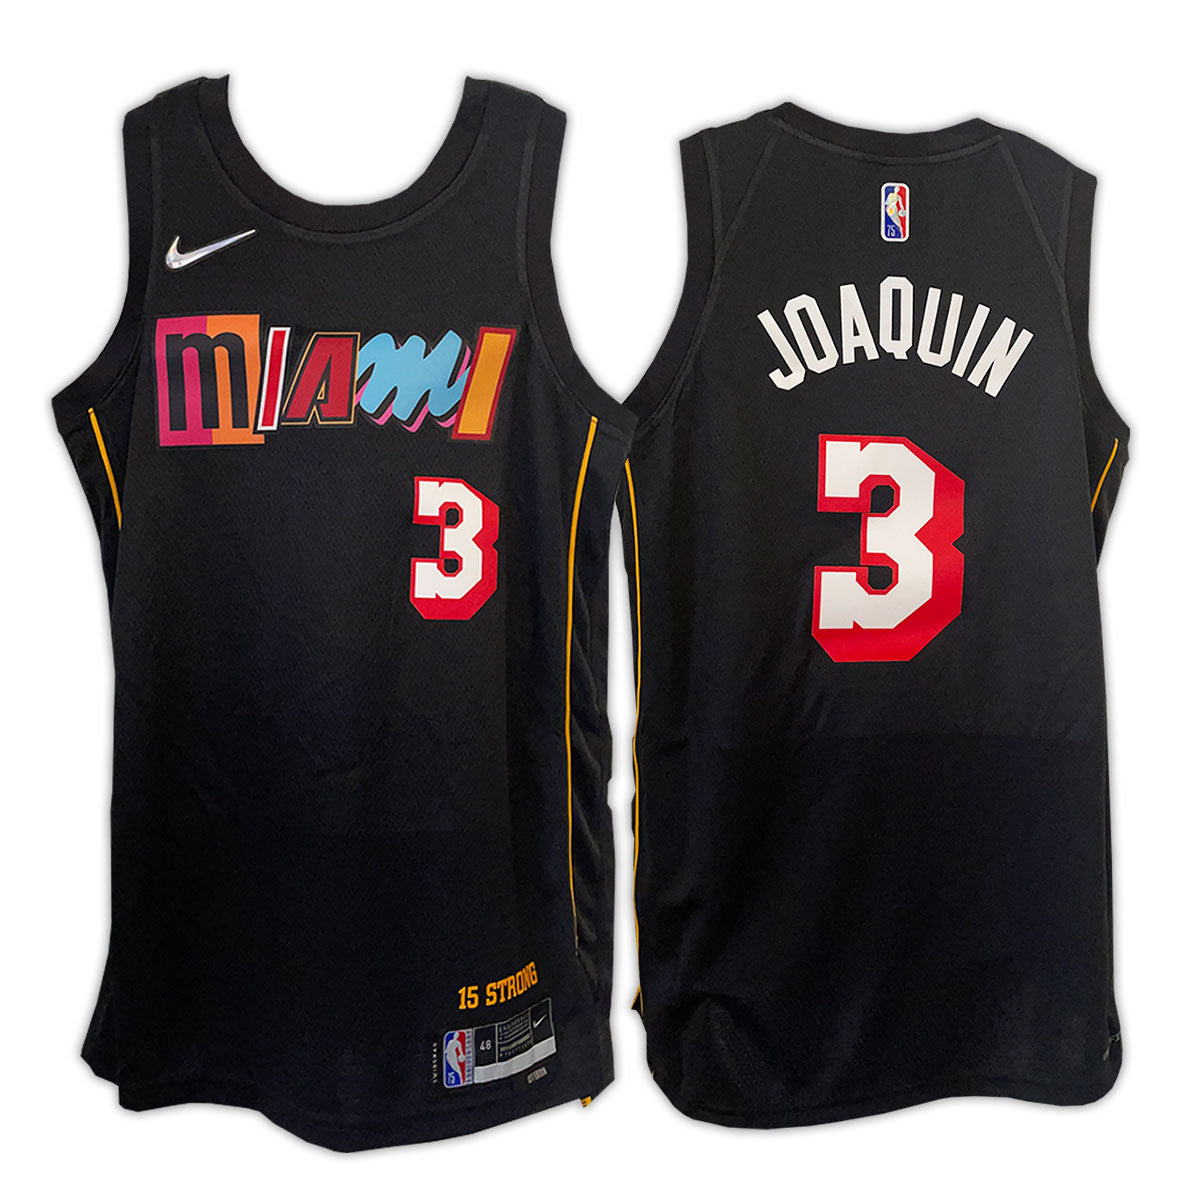 ONE OF A KIND NBA OFFICIAL JOAQUIN #3 NIKE MIAMI HEAT MASHUP AUTHENTIC  JERSEY